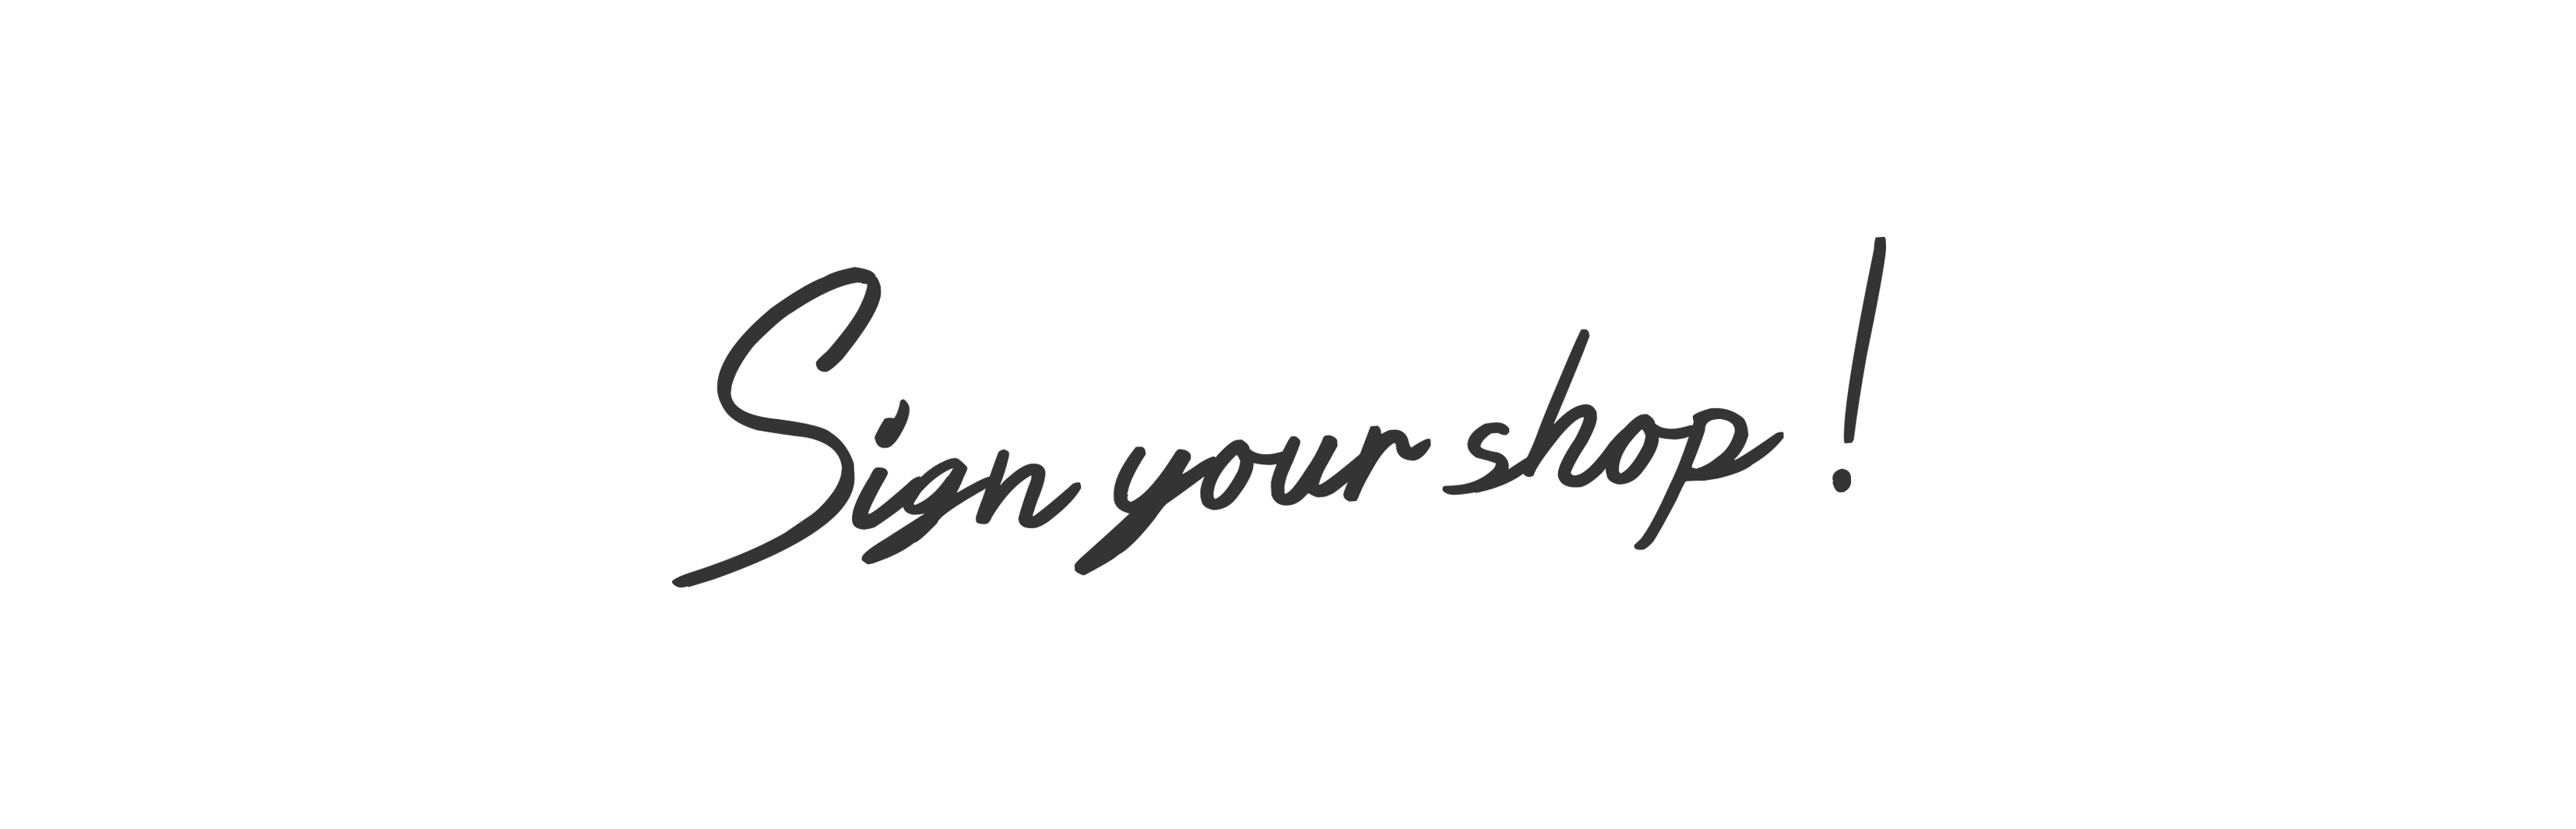 Sign your shop